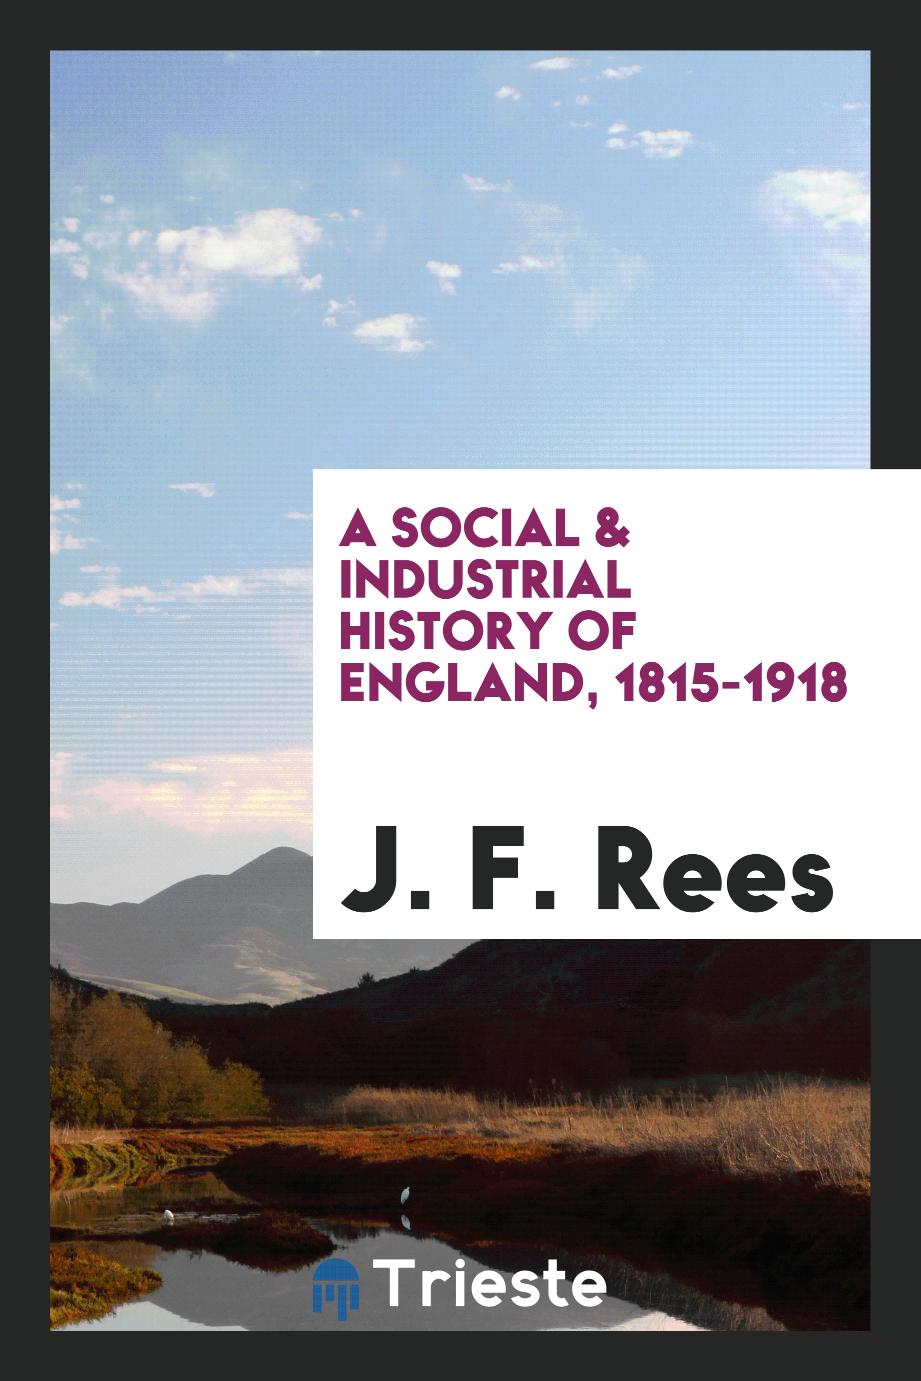 A social & industrial history of England, 1815-1918